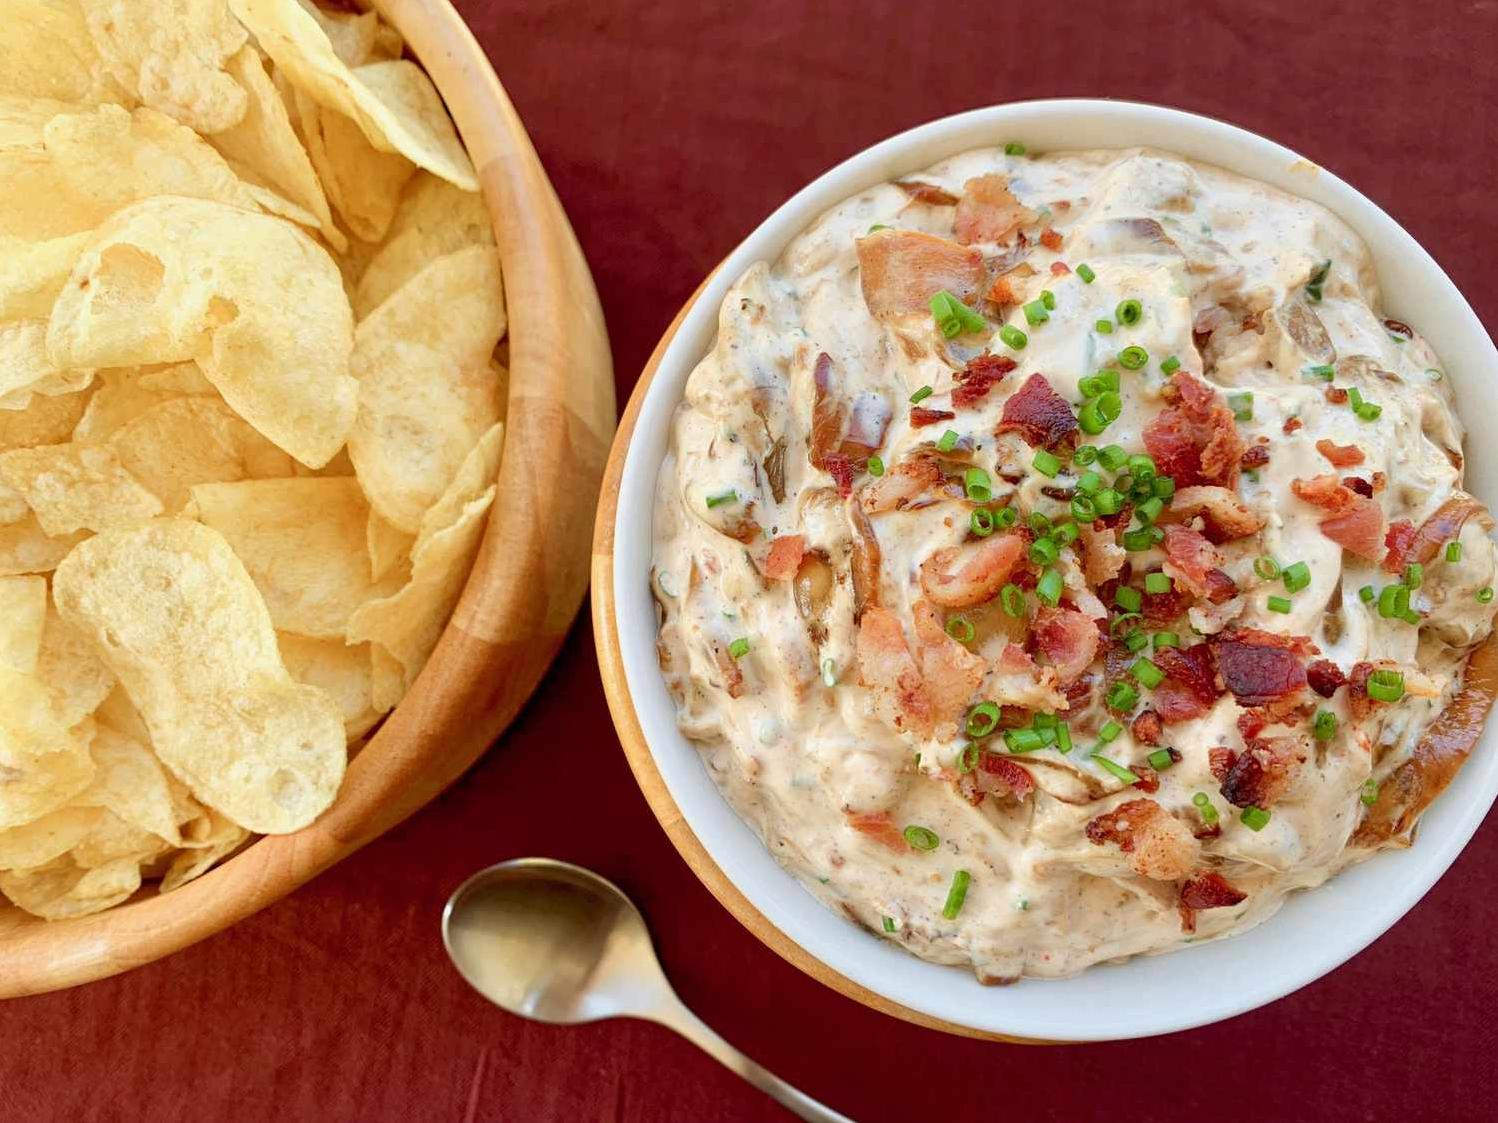  Cheesy, crispy, and savory, this dip is the ultimate indulgence for any snack-time.